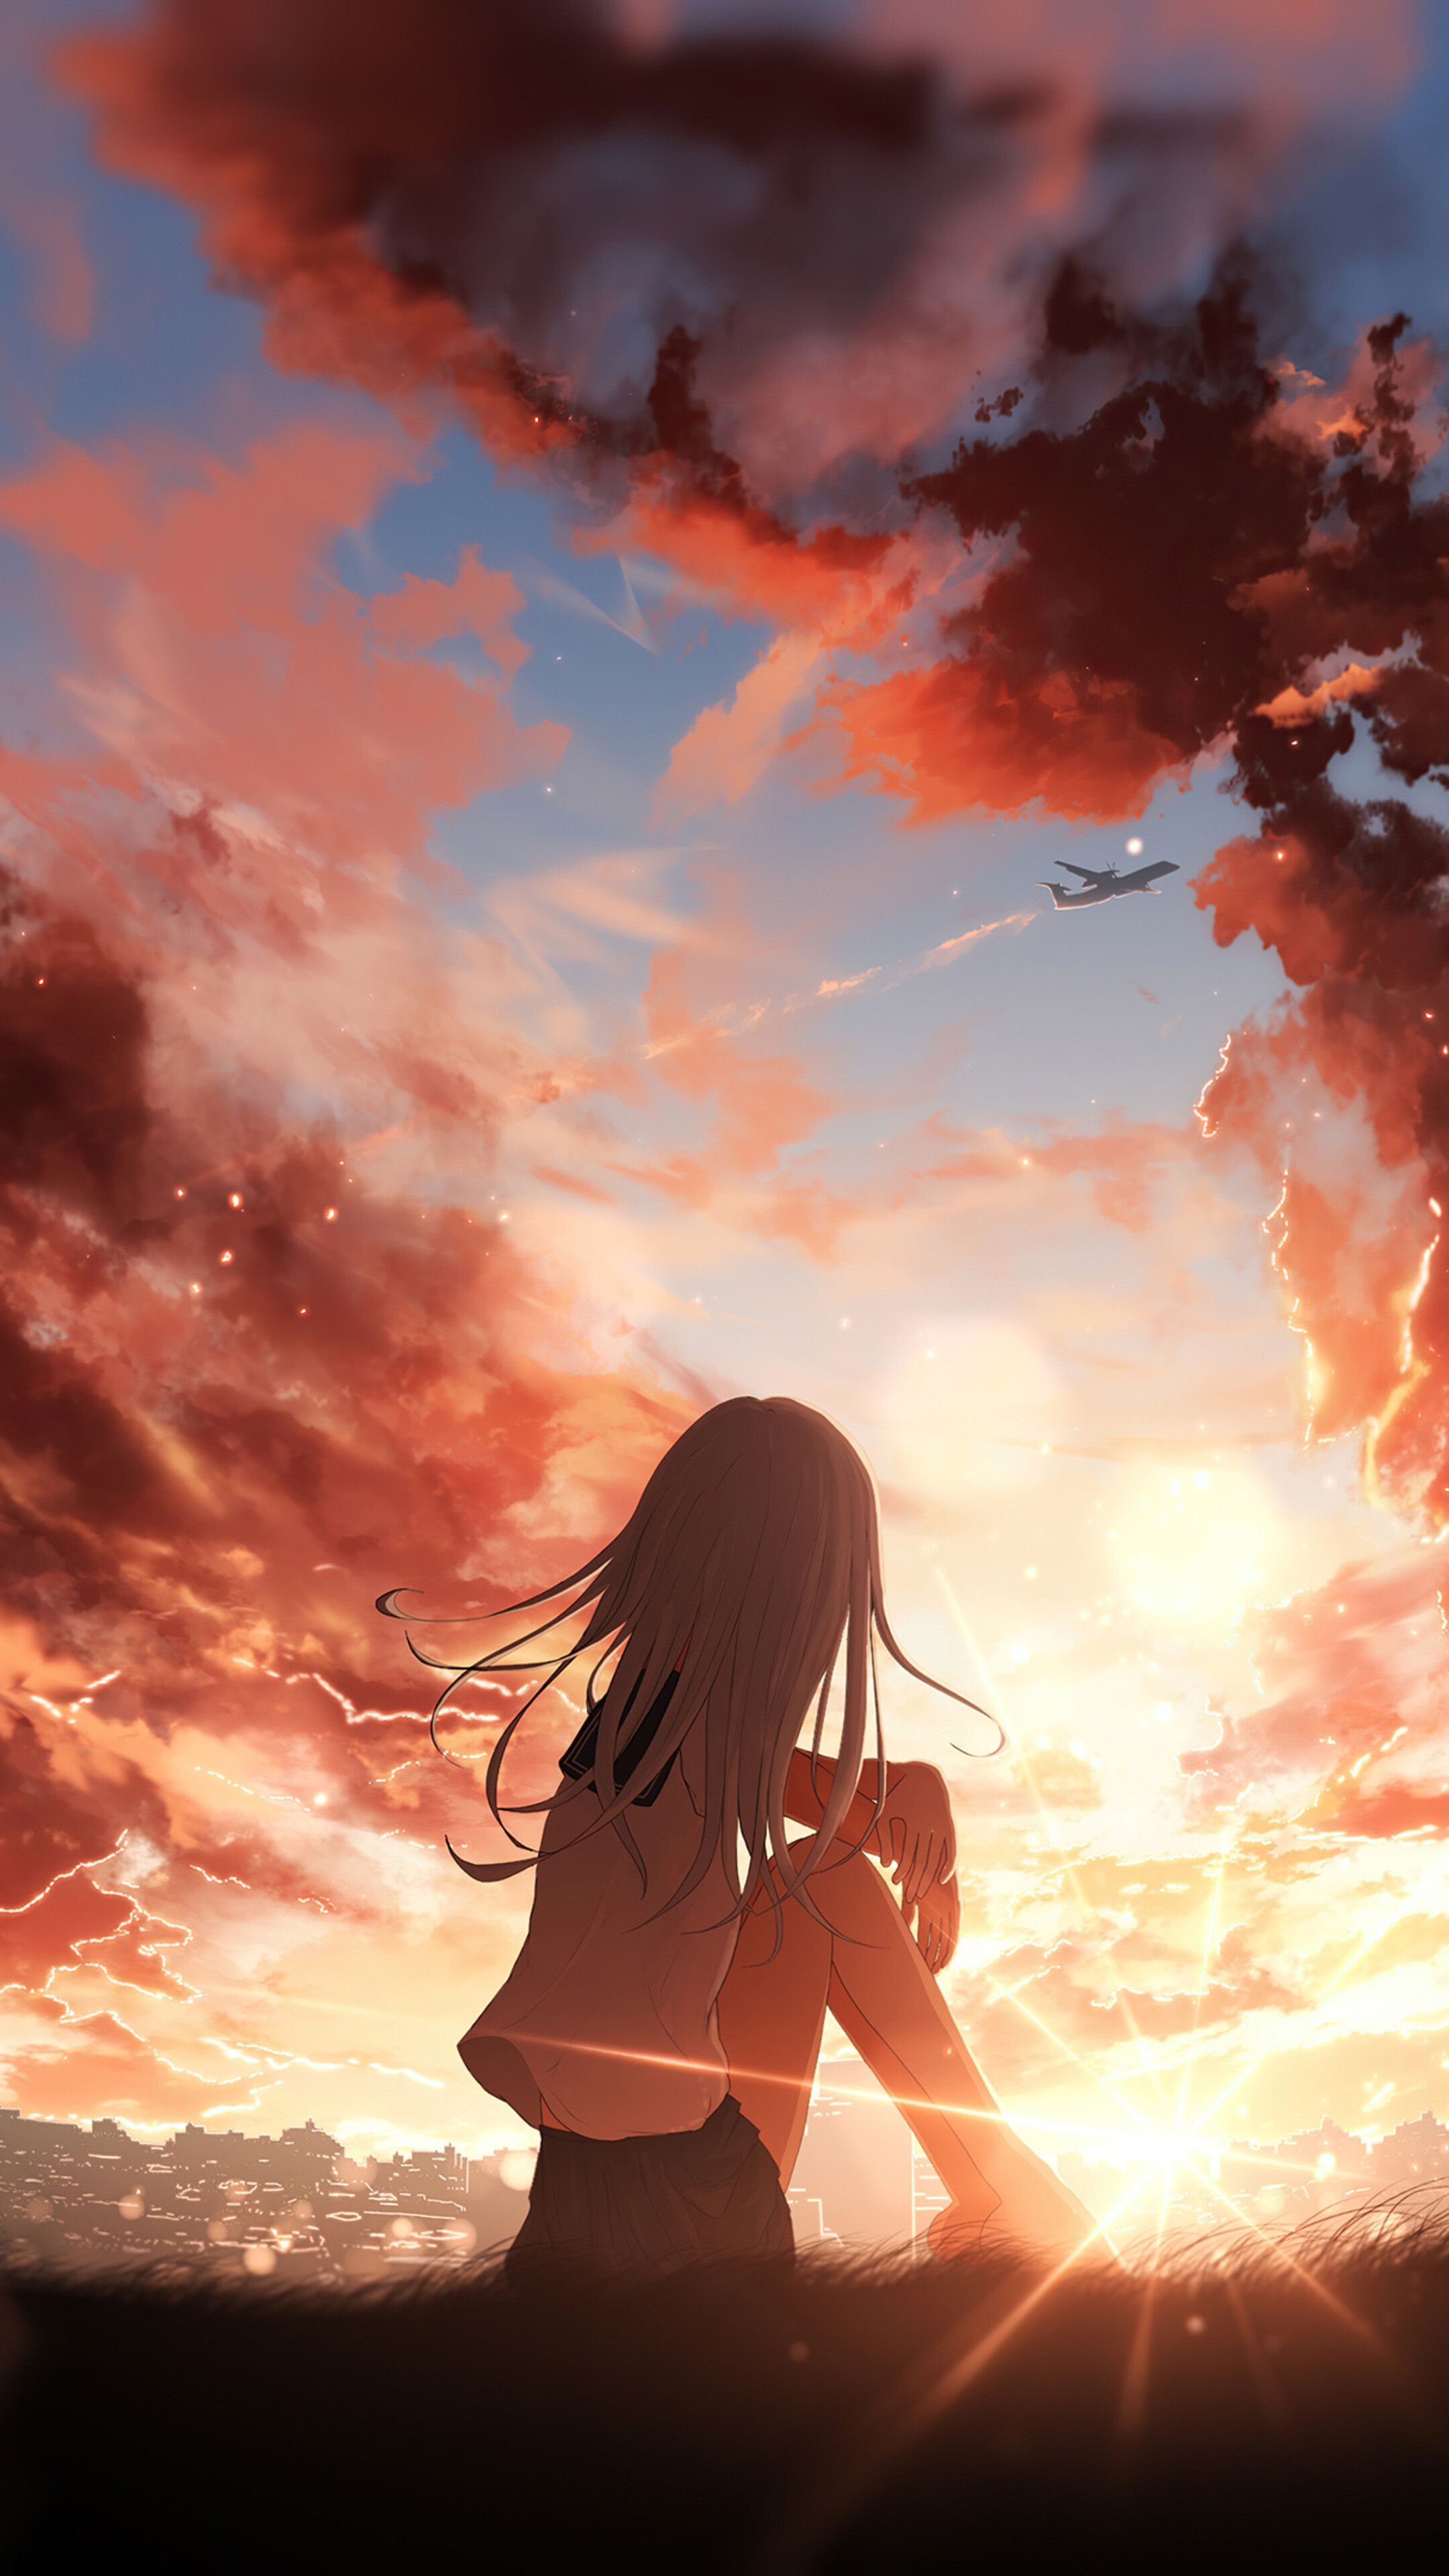 Girly: Anime character, The rising sun, A sky of fire that lit up the entire cloud. 2160x3840 4K Wallpaper.